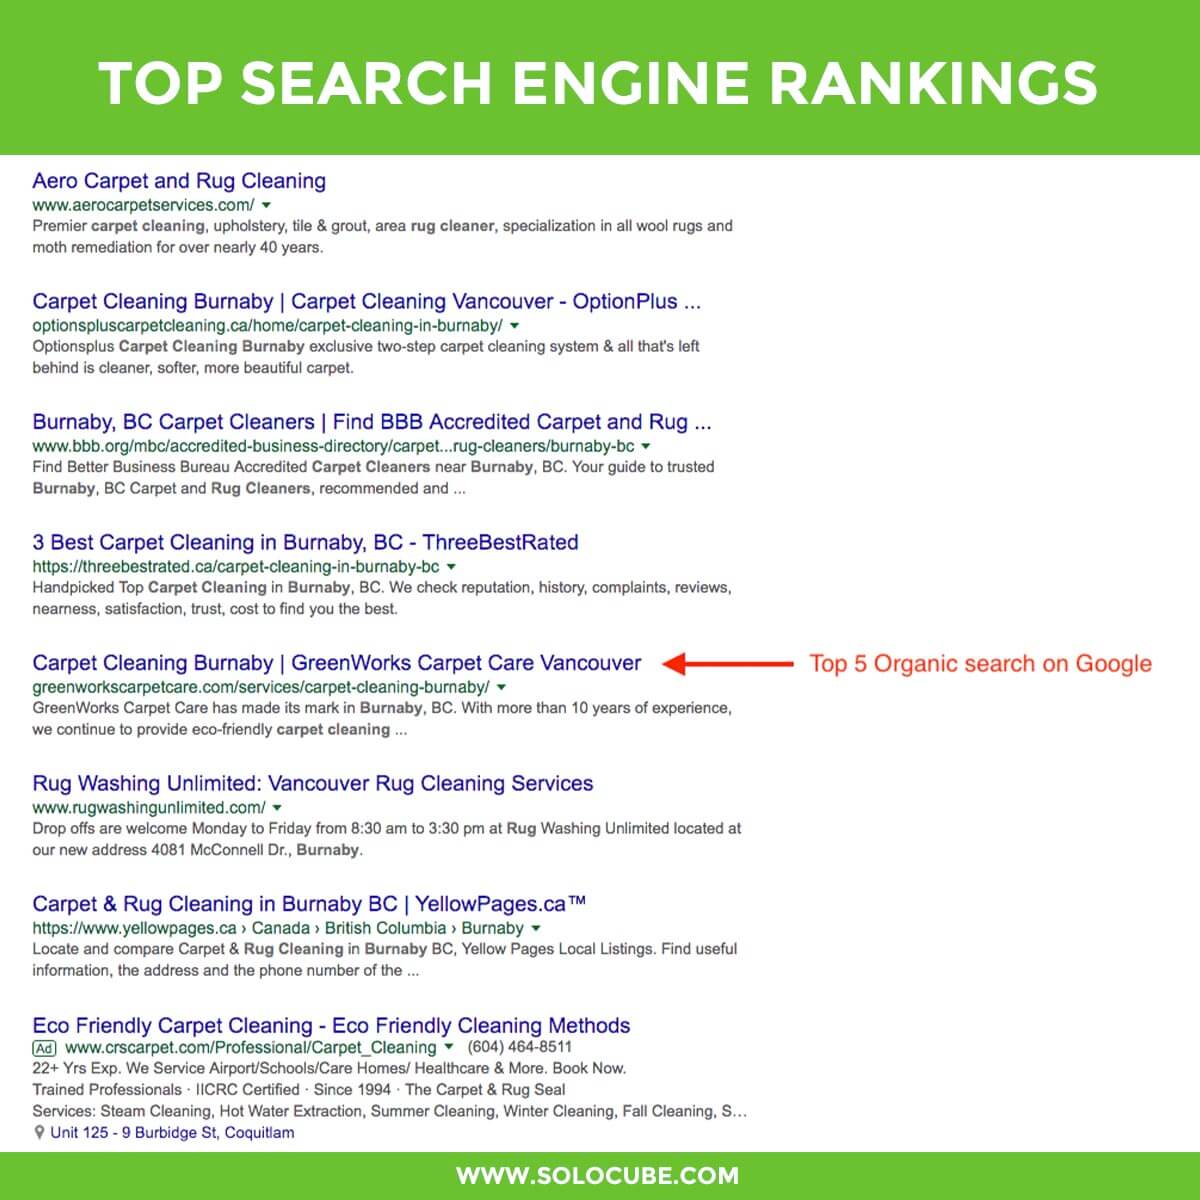 top SEO google ranking by solocube 11 - Chiropractor SEO